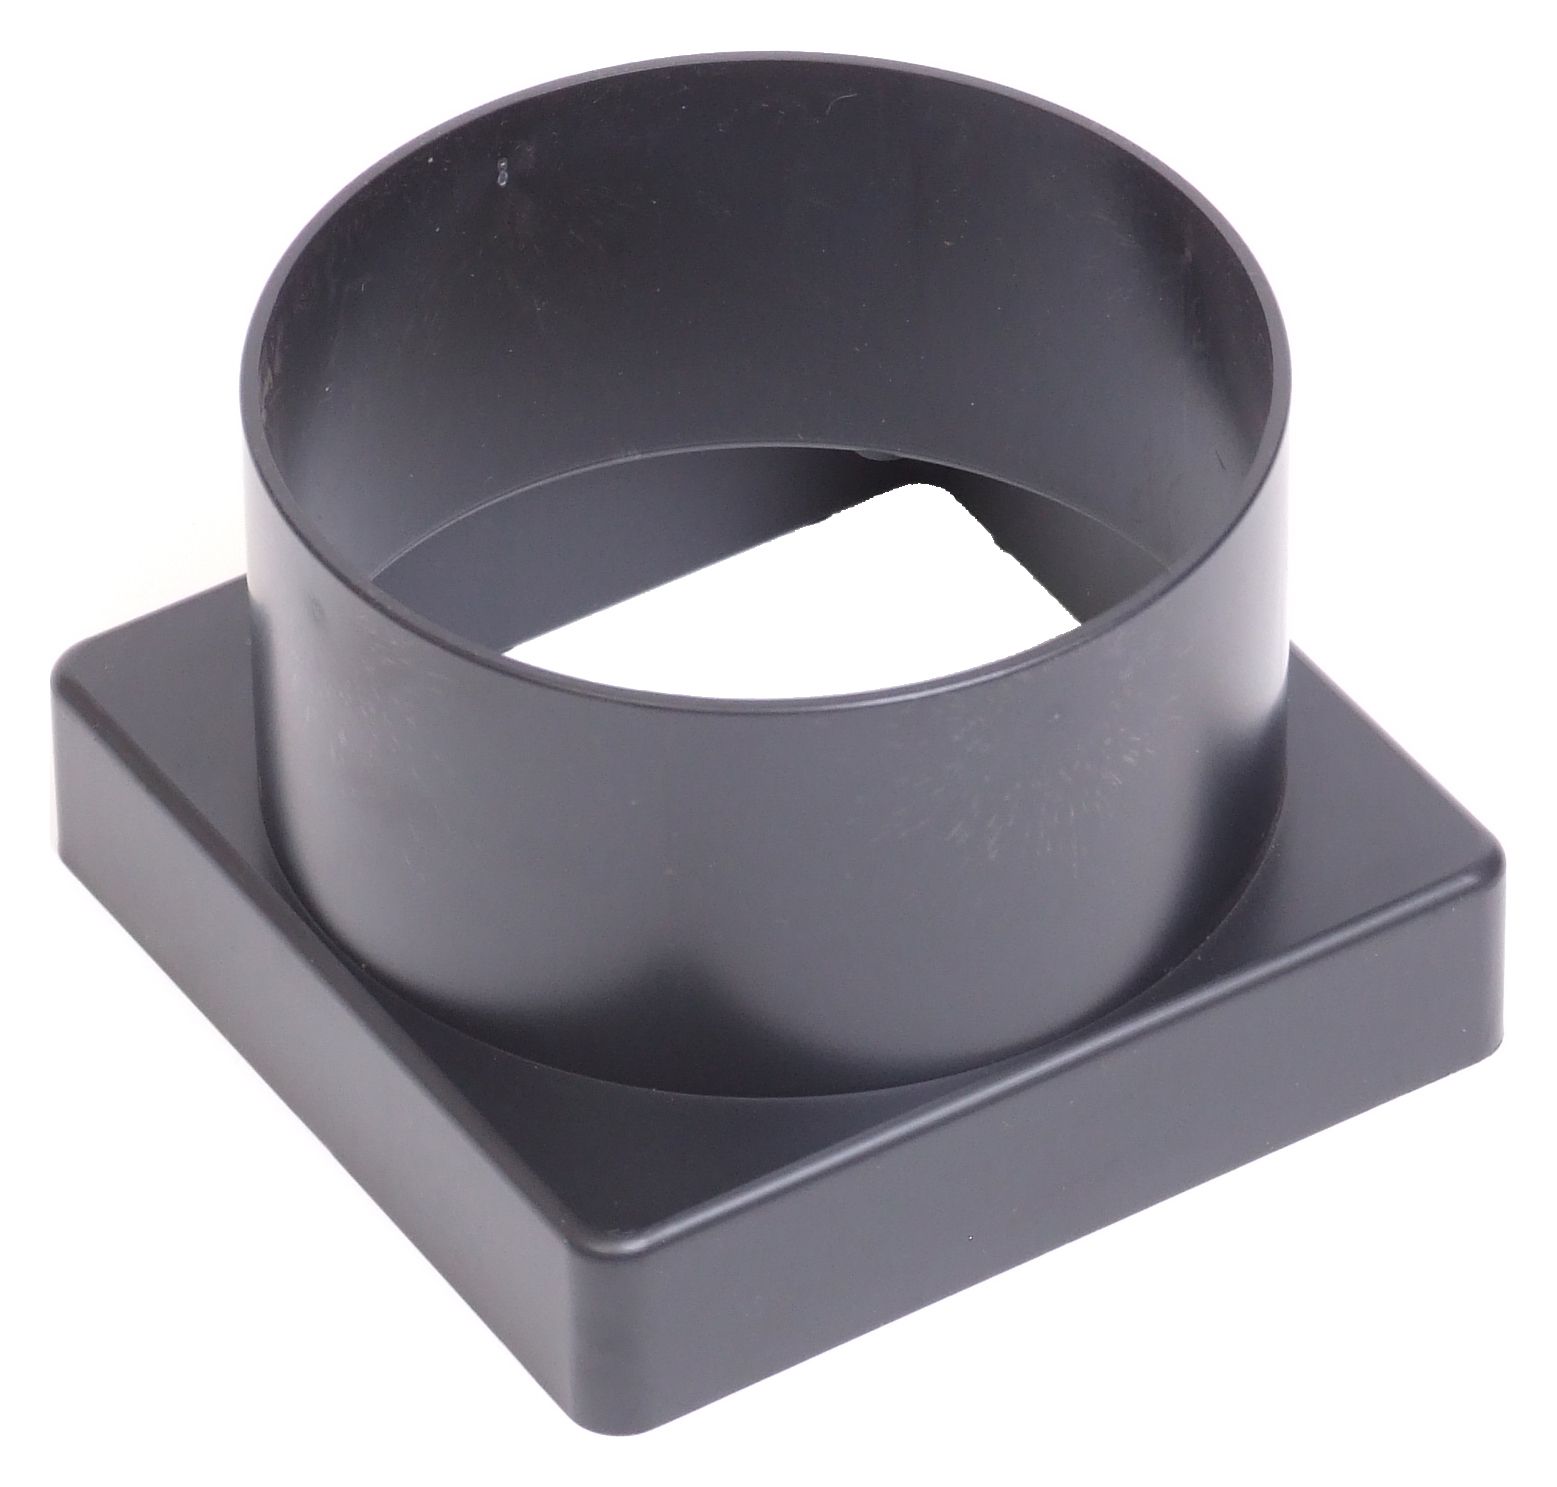 Image of Envirotile Square to Round Pipe Adaptor - 110 x 1 x 1mm